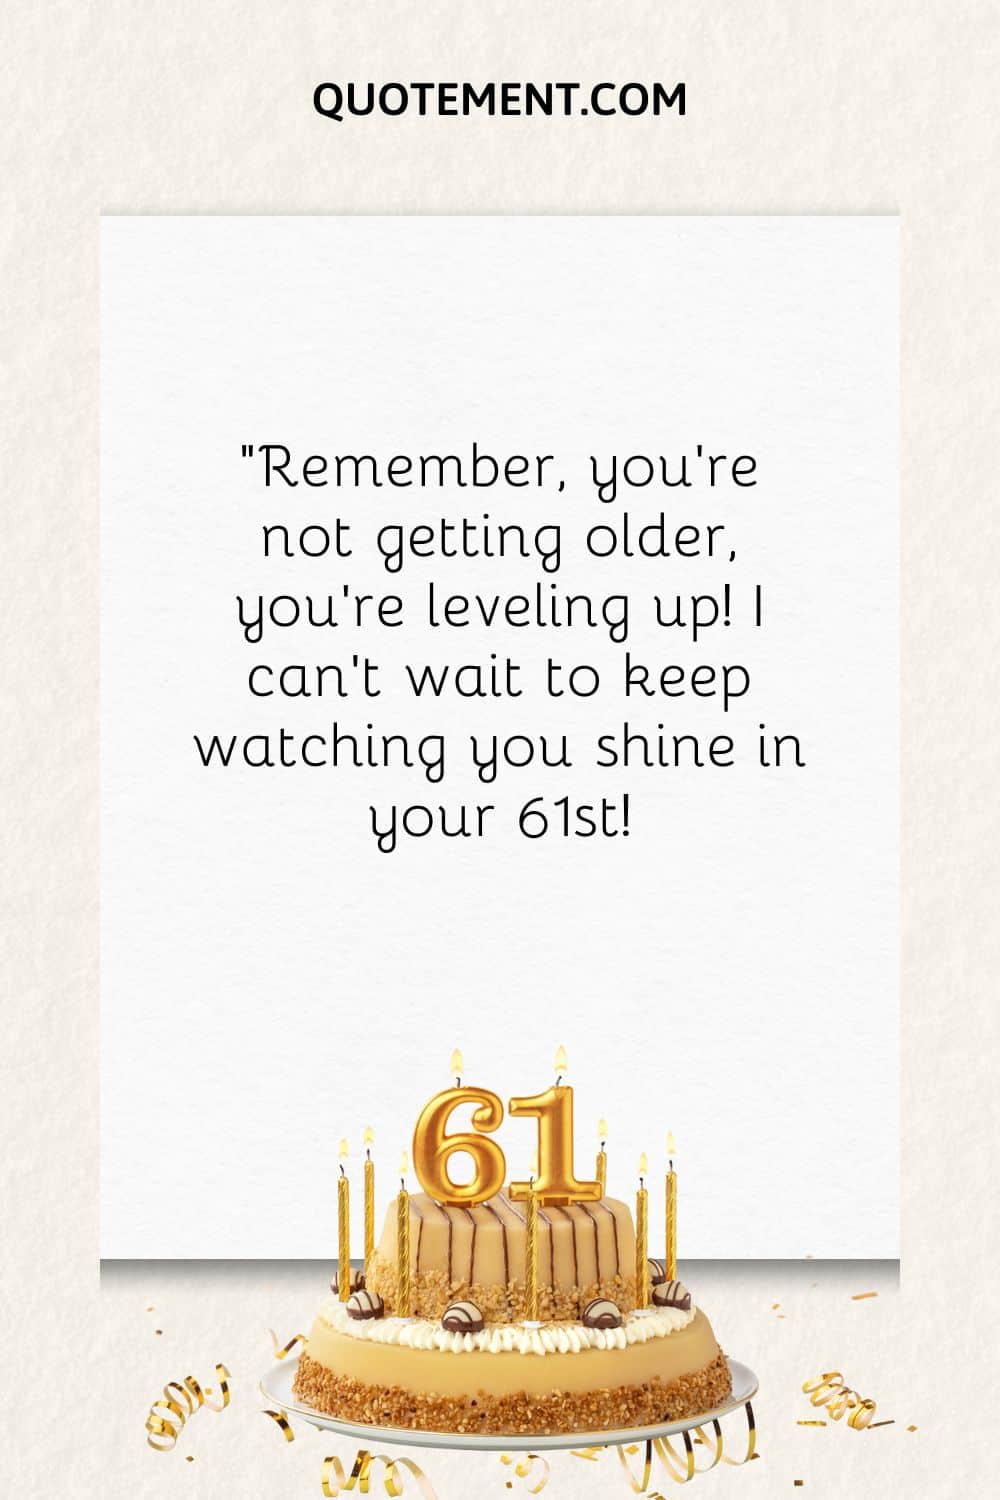 “Remember, you're not getting older, you're leveling up! I can't wait to keep watching you shine in your 61st!